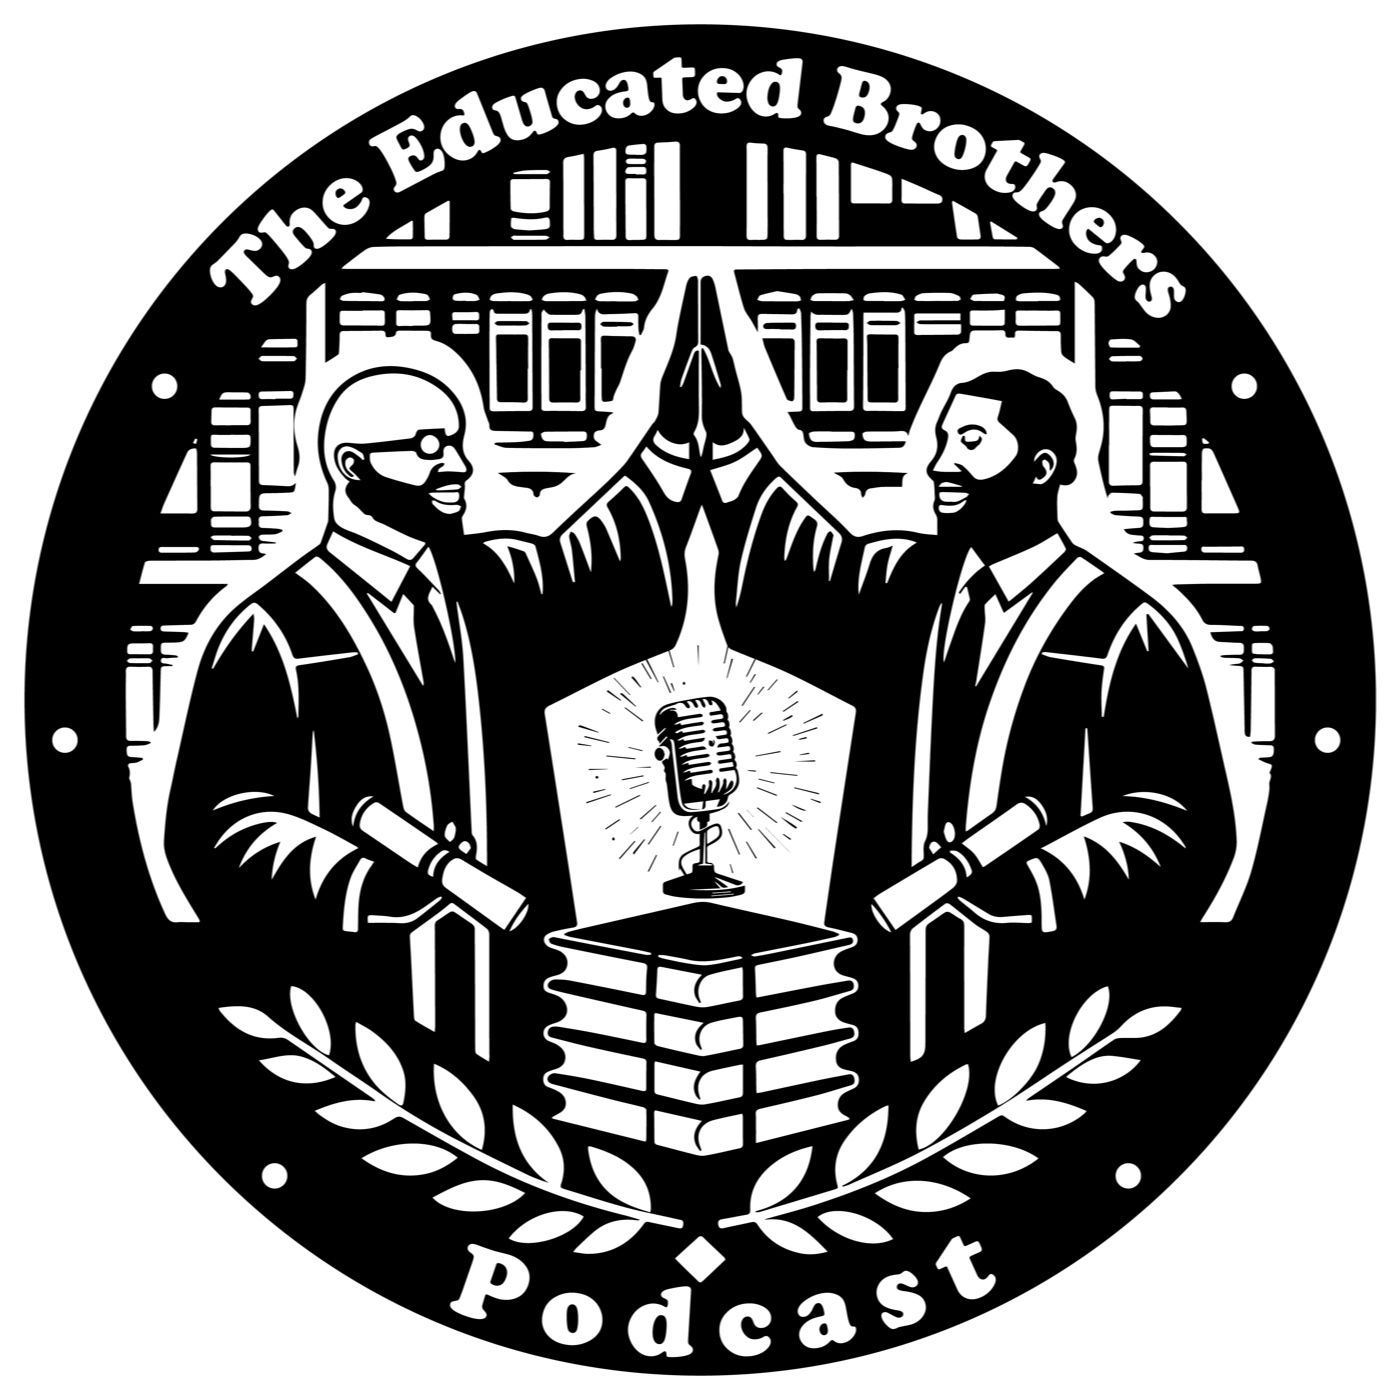 The Educated Brothers Podcast